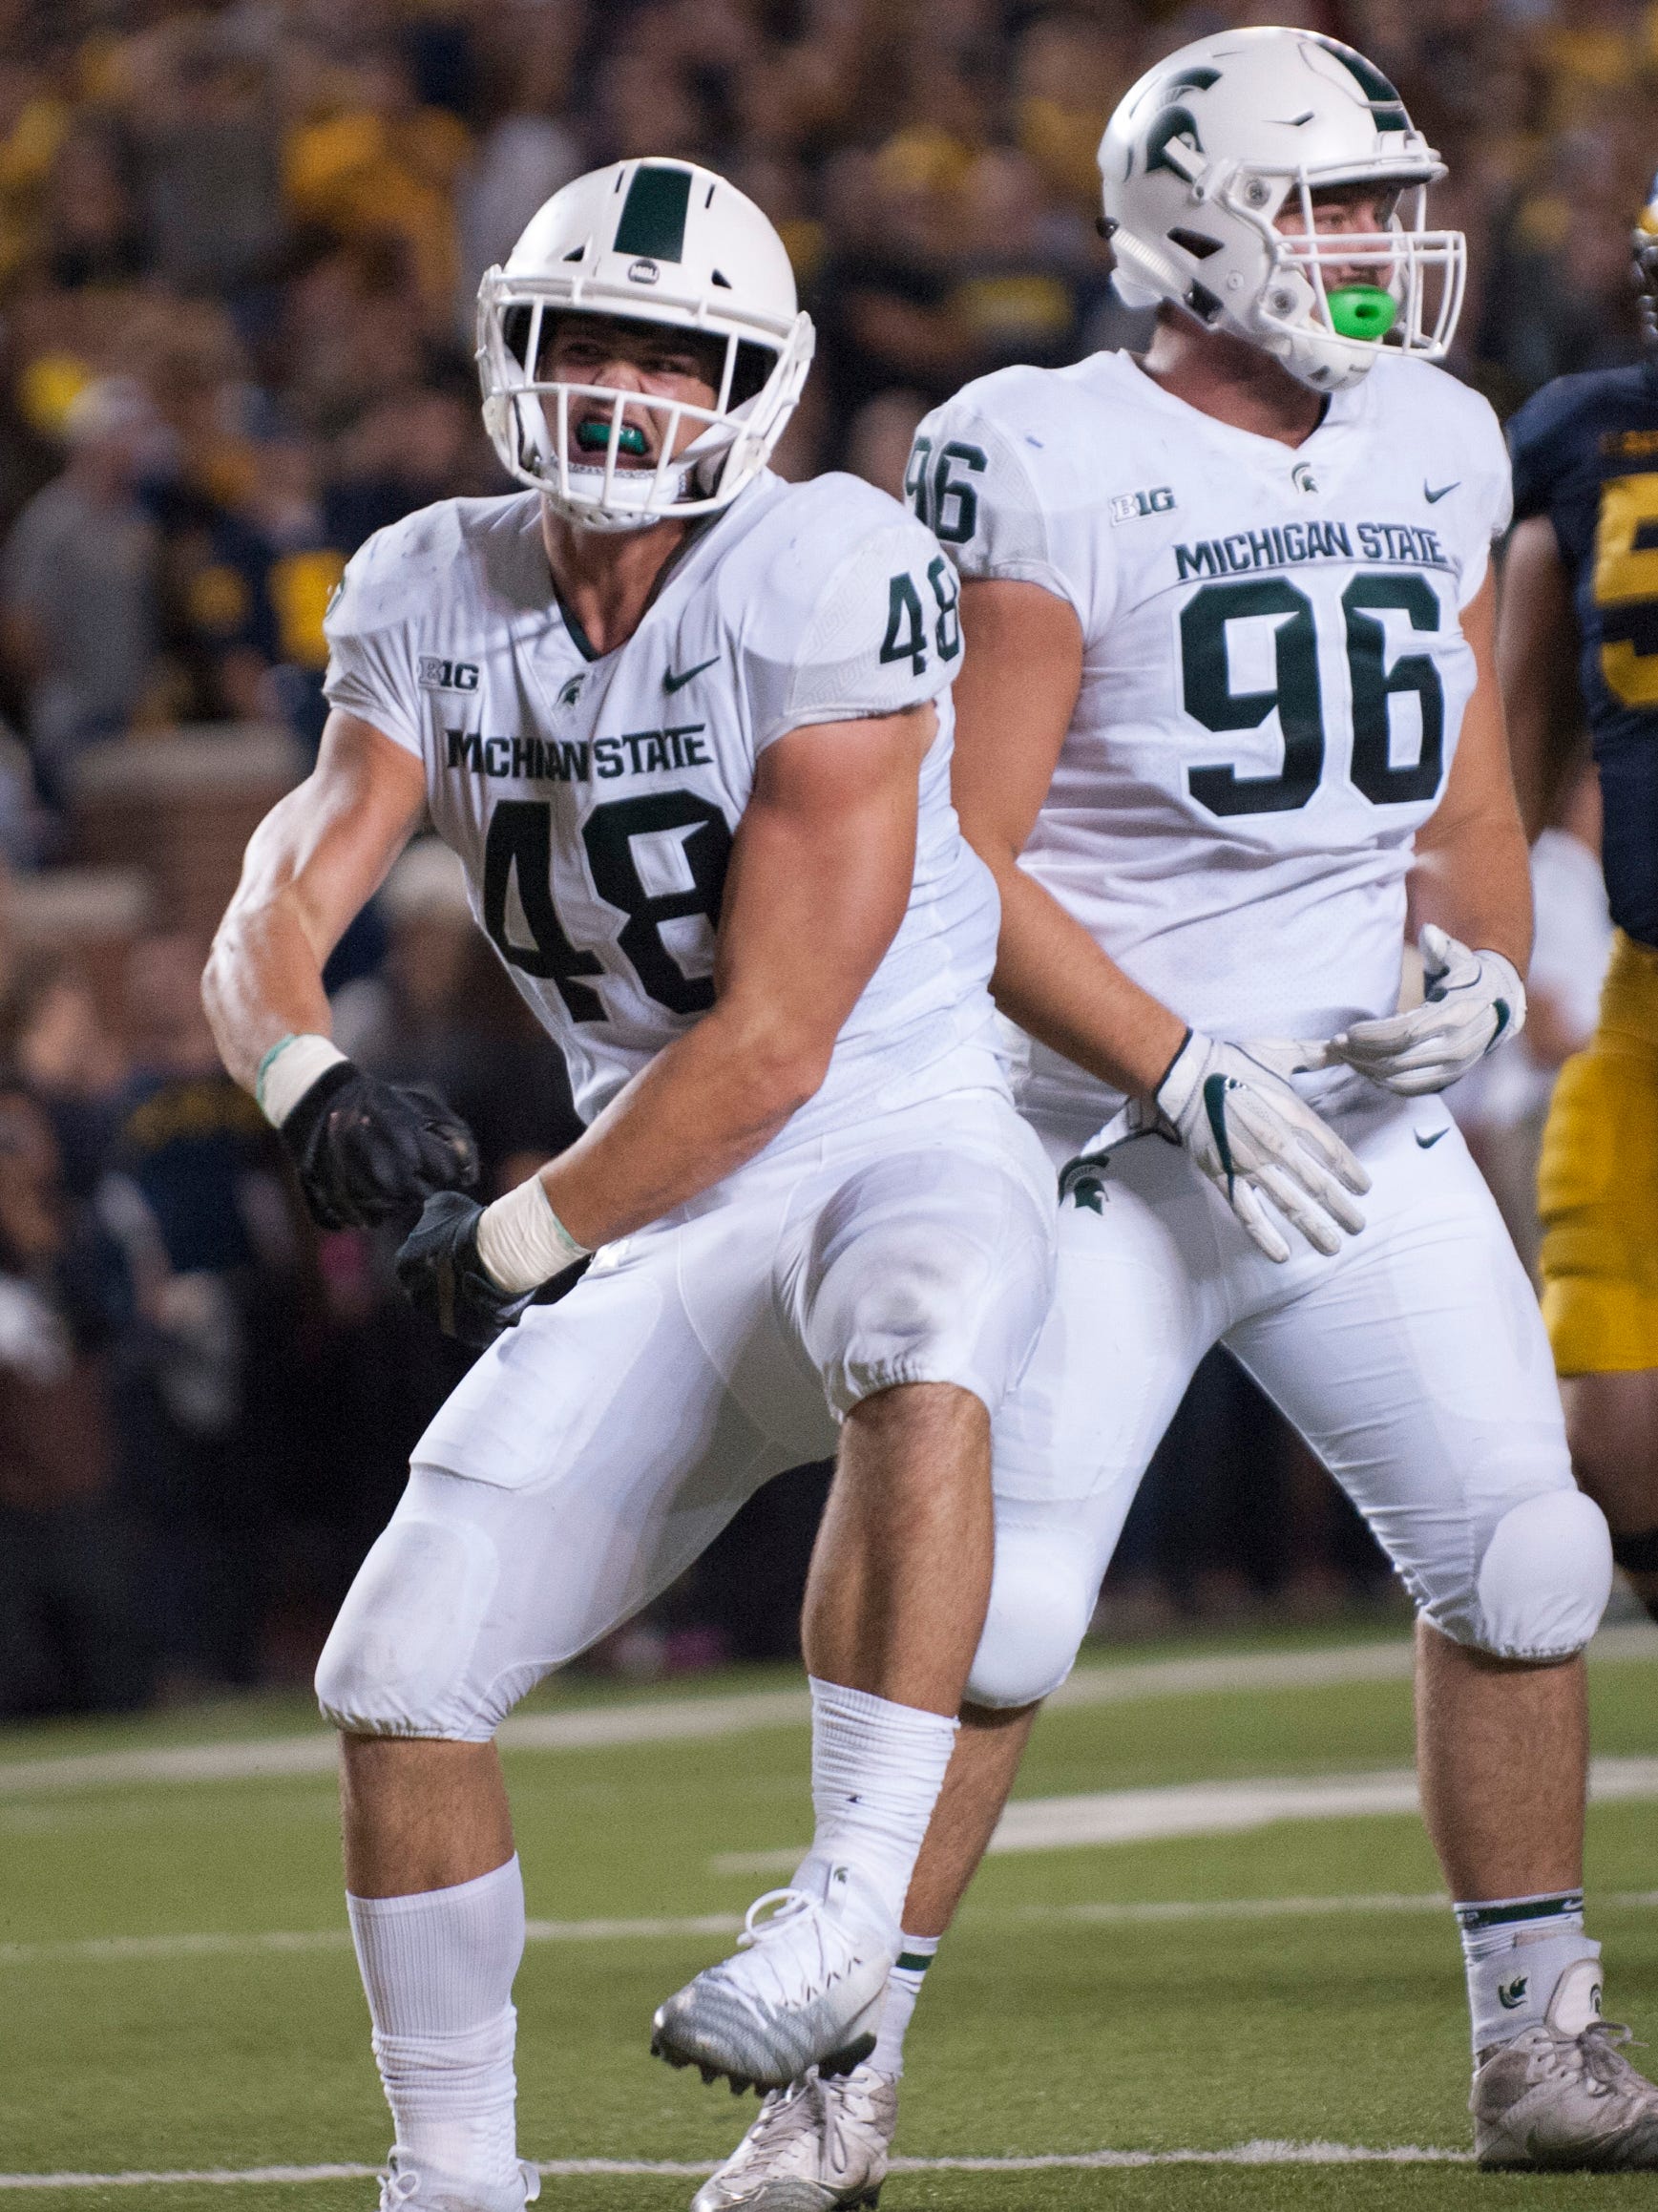 DEFENSE
Defensive end – Kenny Willekes, Jr. The former walk-on added some spark to the MSU pass rush last season with 14.5 tackles for loss, including seven sacks. Willekes (48) will be primed for another big season, though depth could be an issue for the Spartans as senior Dillon Alexander is capable but not a game-changer. That could come from young, unproven players like redshirt freshmen DeAri Todd and Jack Camper.